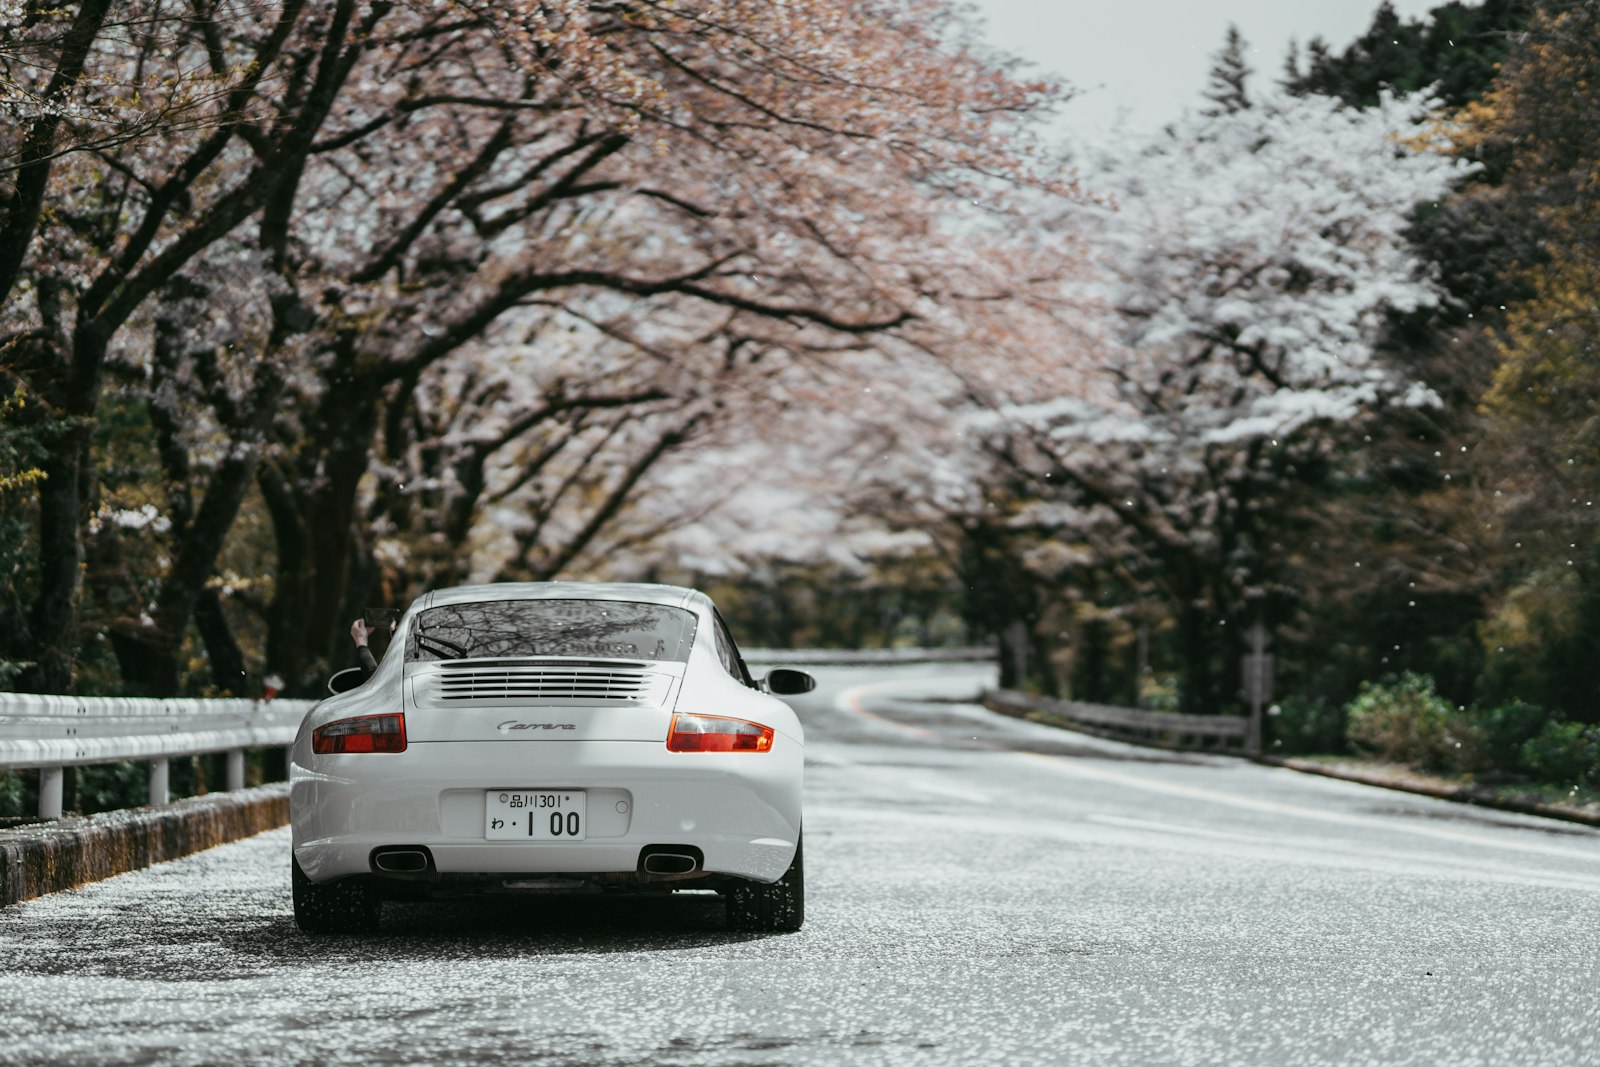 Sony a7R II + Sigma 85mm F1.4 DG HSM Art sample photo. White coupe parked near photography